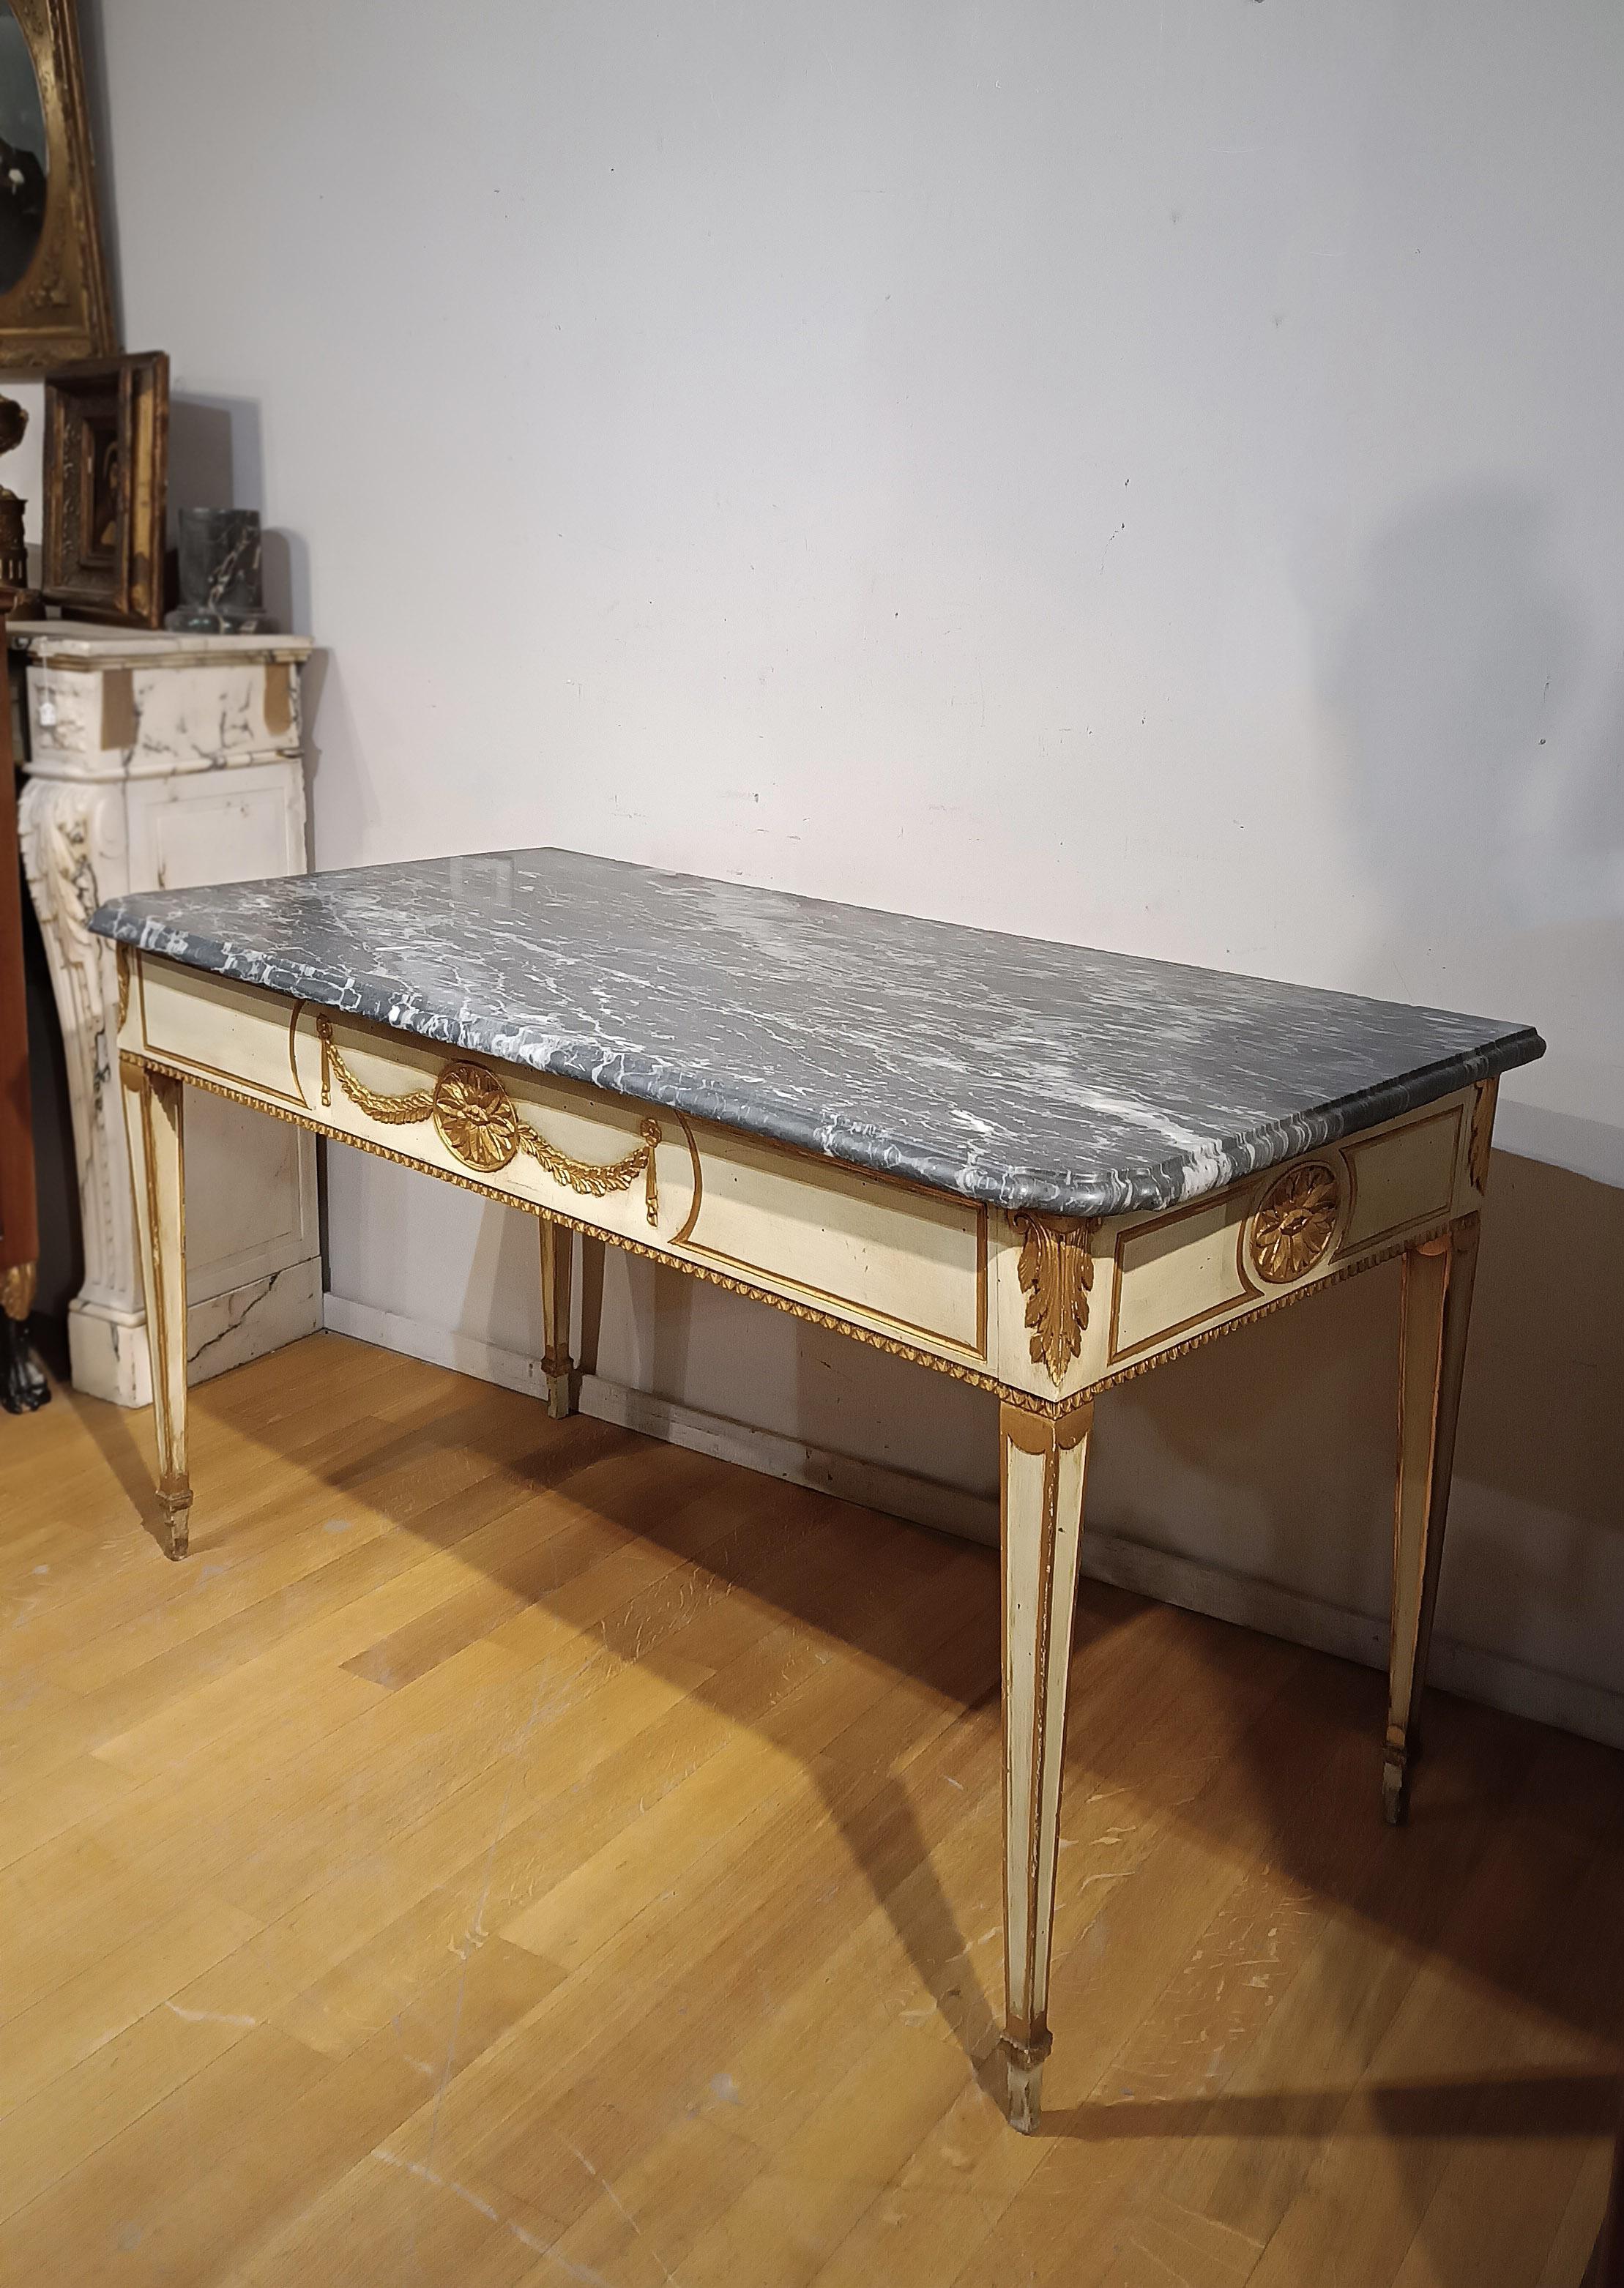 Neoclassical Revival END OF THE 18th CENTURY NEOCLASSICAL CONSOLLE WITH GRAY BARDIGLIO MARBLE For Sale